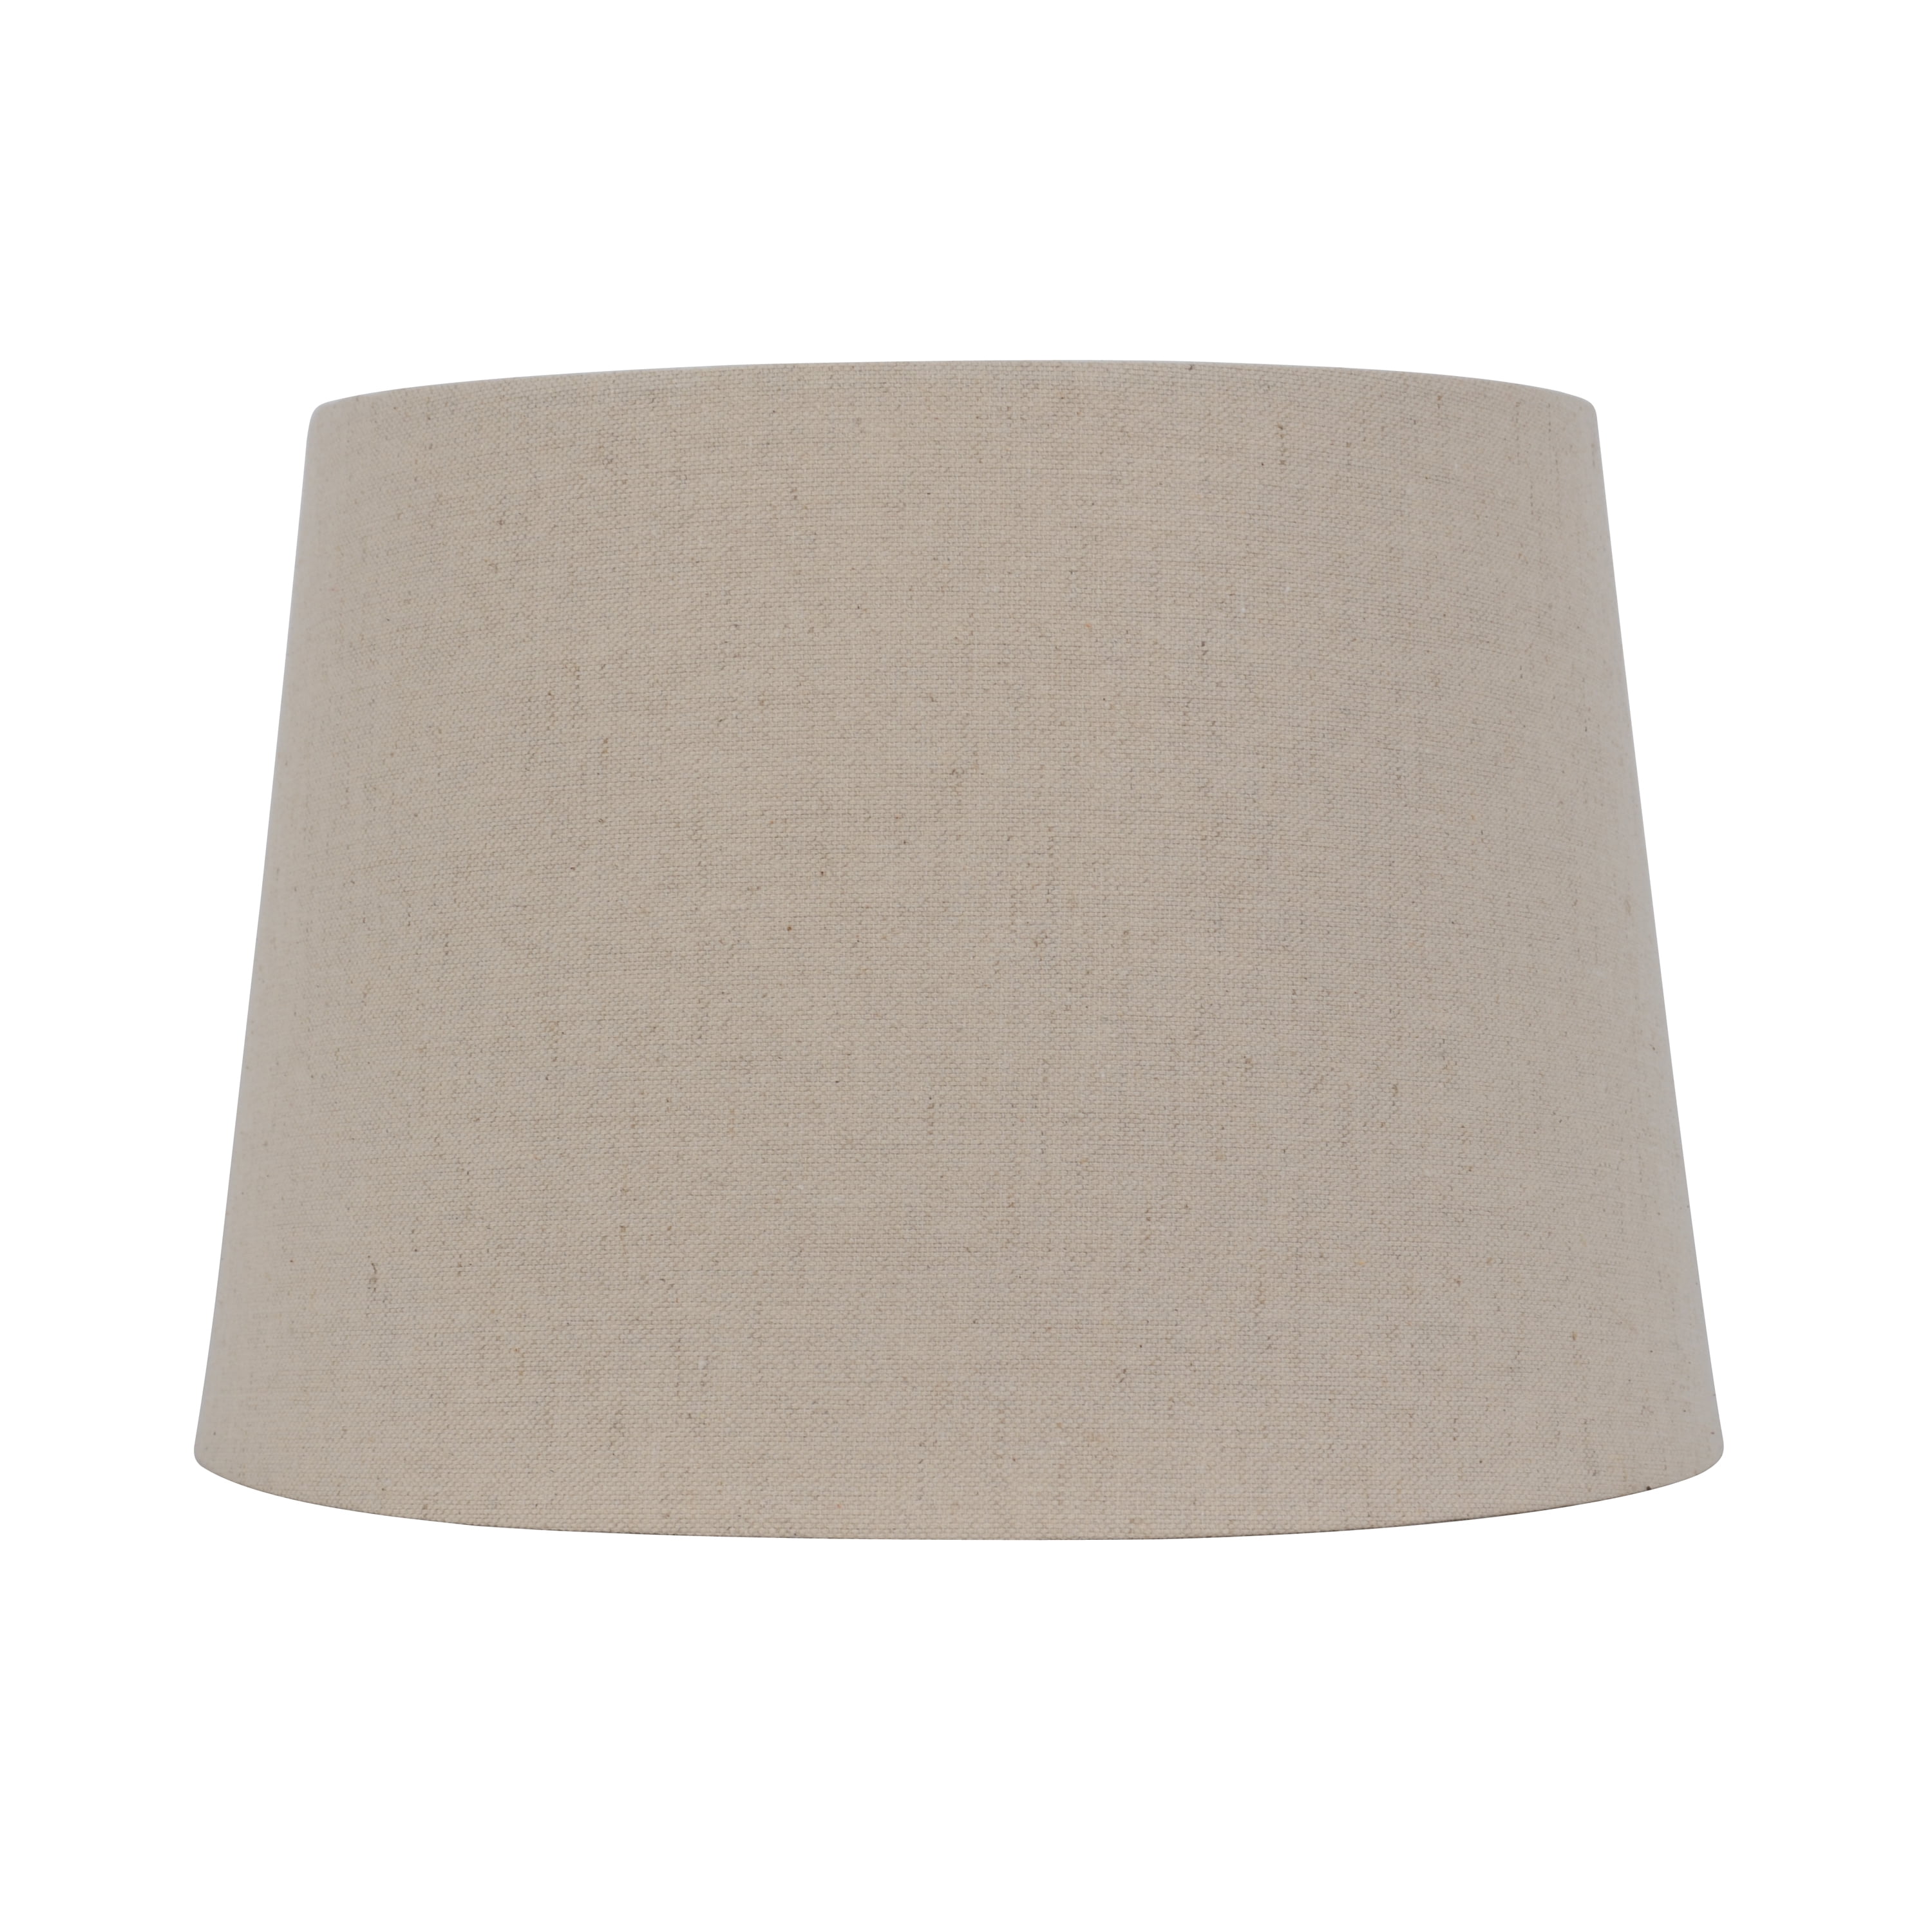 Living Accents  Drum  Brown/White  Fabric  Lamp Shade  1 pk 